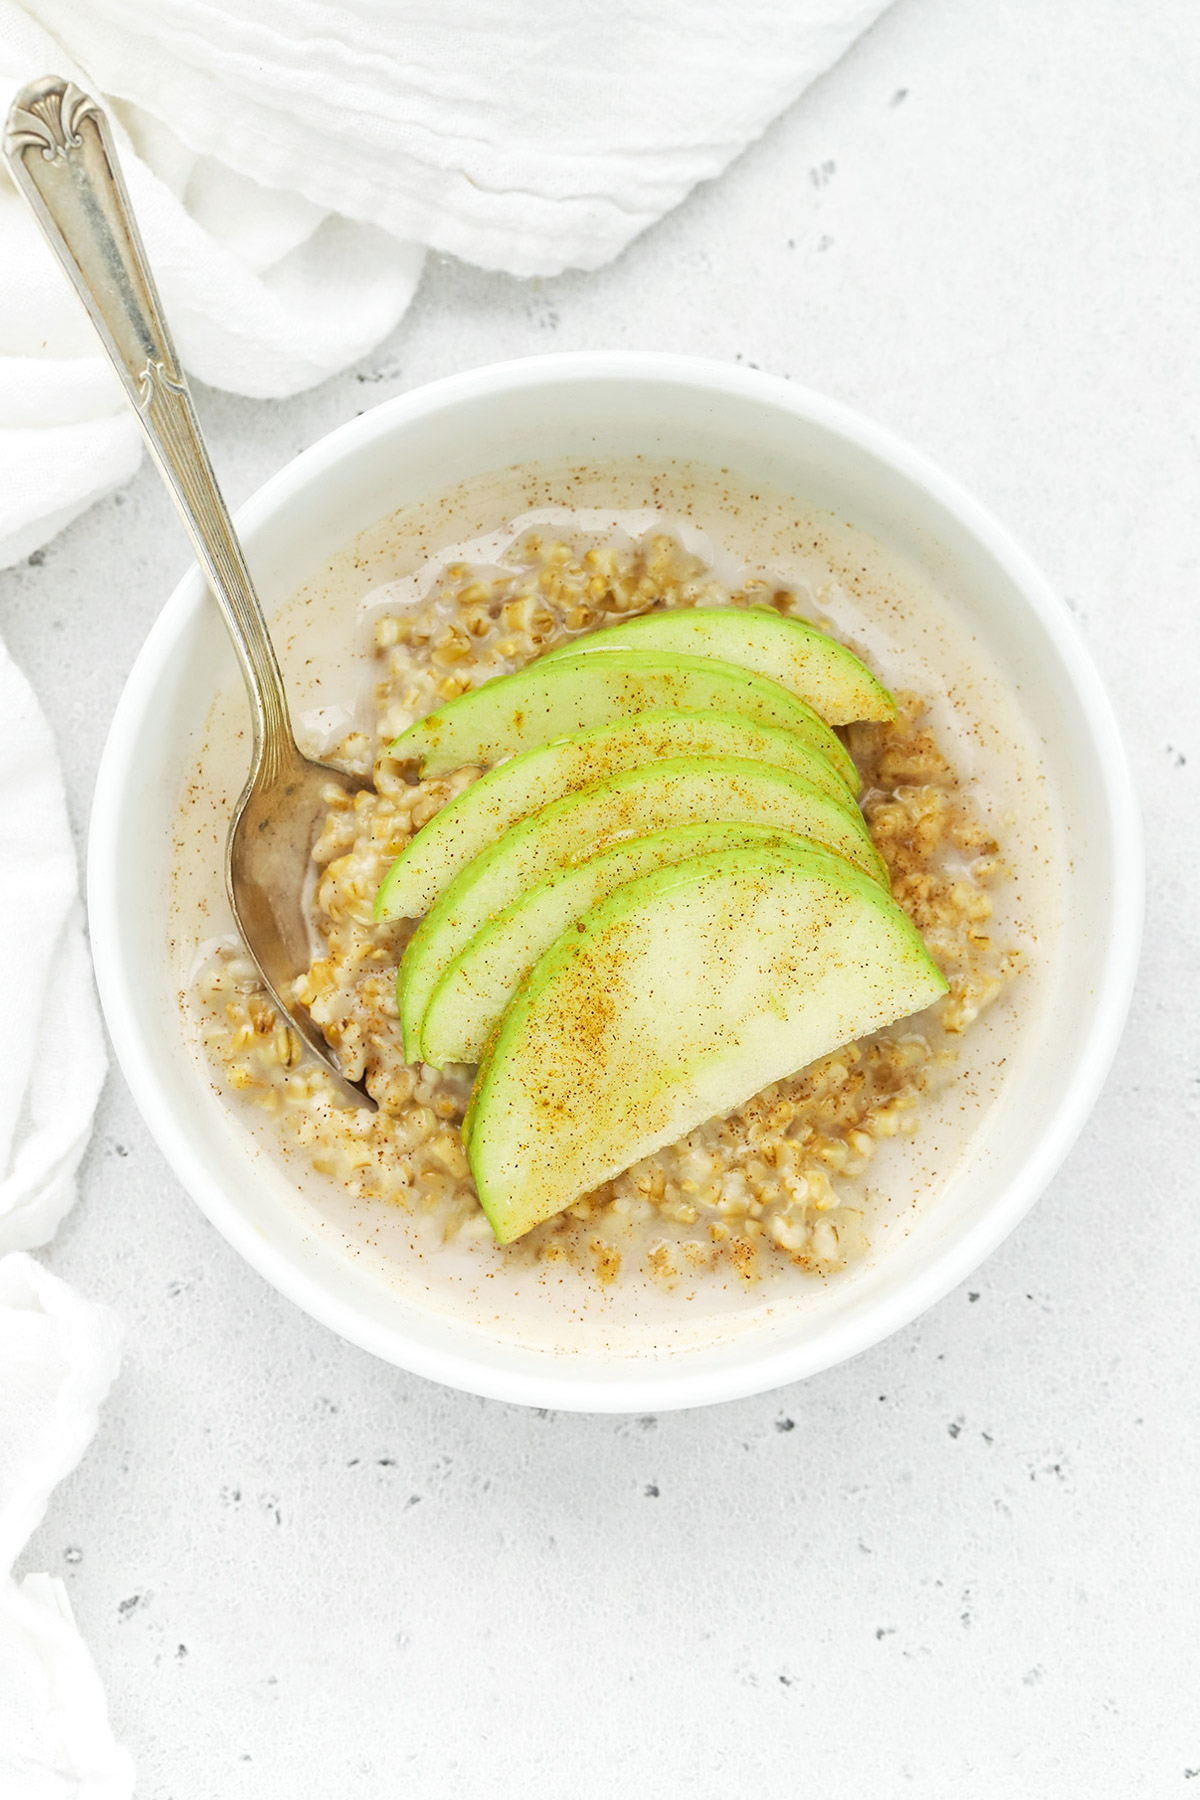 Overhead view of a bowl of steel-cut oats topped with cinnamon and sliced apples